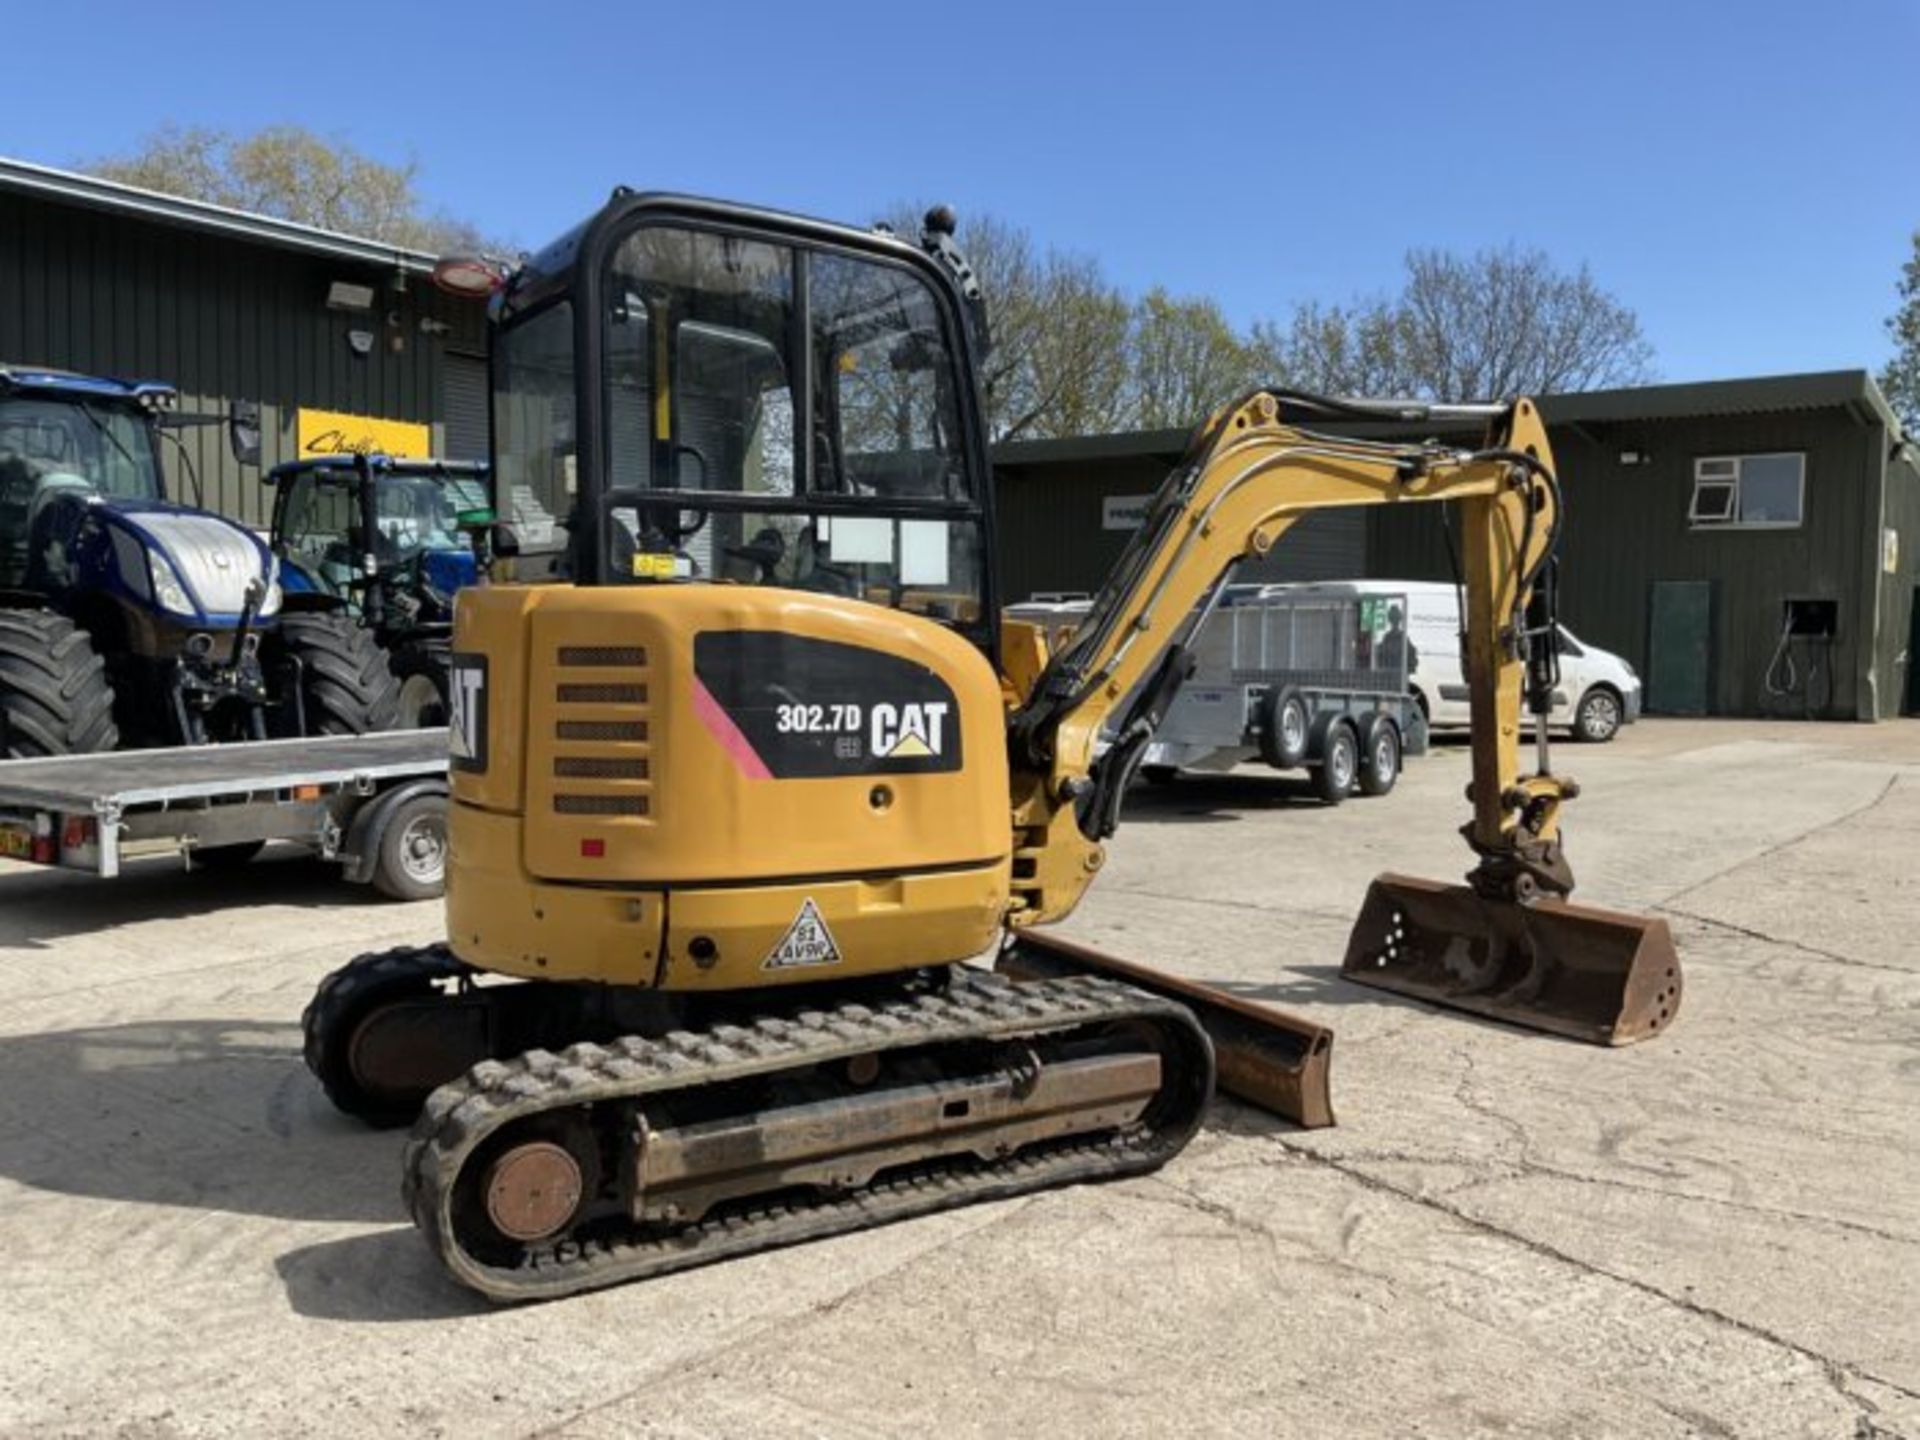 CAT 302.7D CR MINI EXCAVATOR WITH RUBBER TRACKS, FRONT BLADE - Image 6 of 10